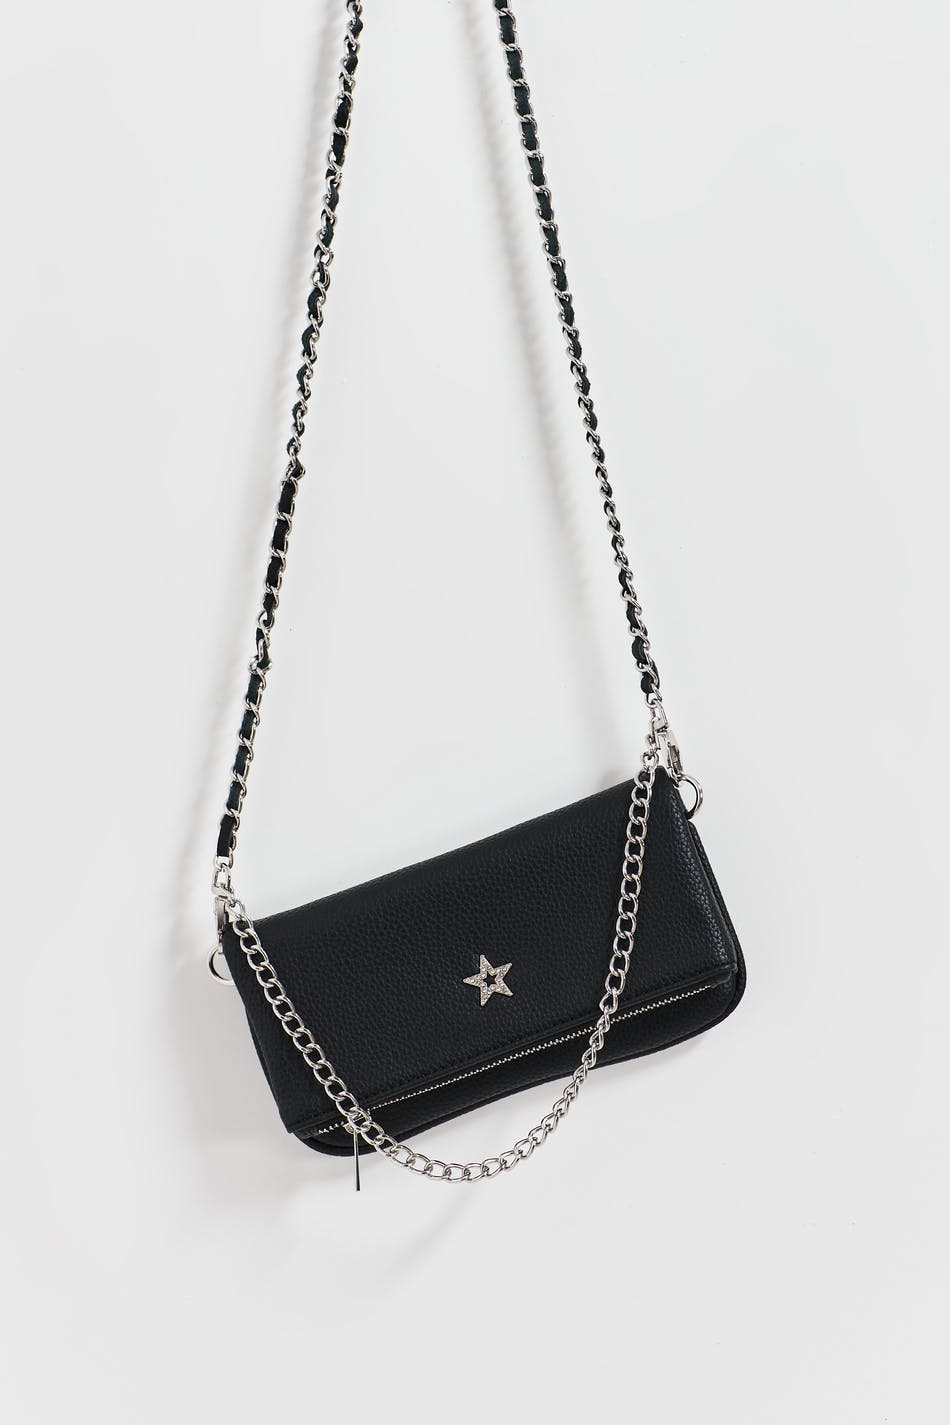 Gina Tricot - Y star chain bag - young-accessories - Black - ONESIZE - Female